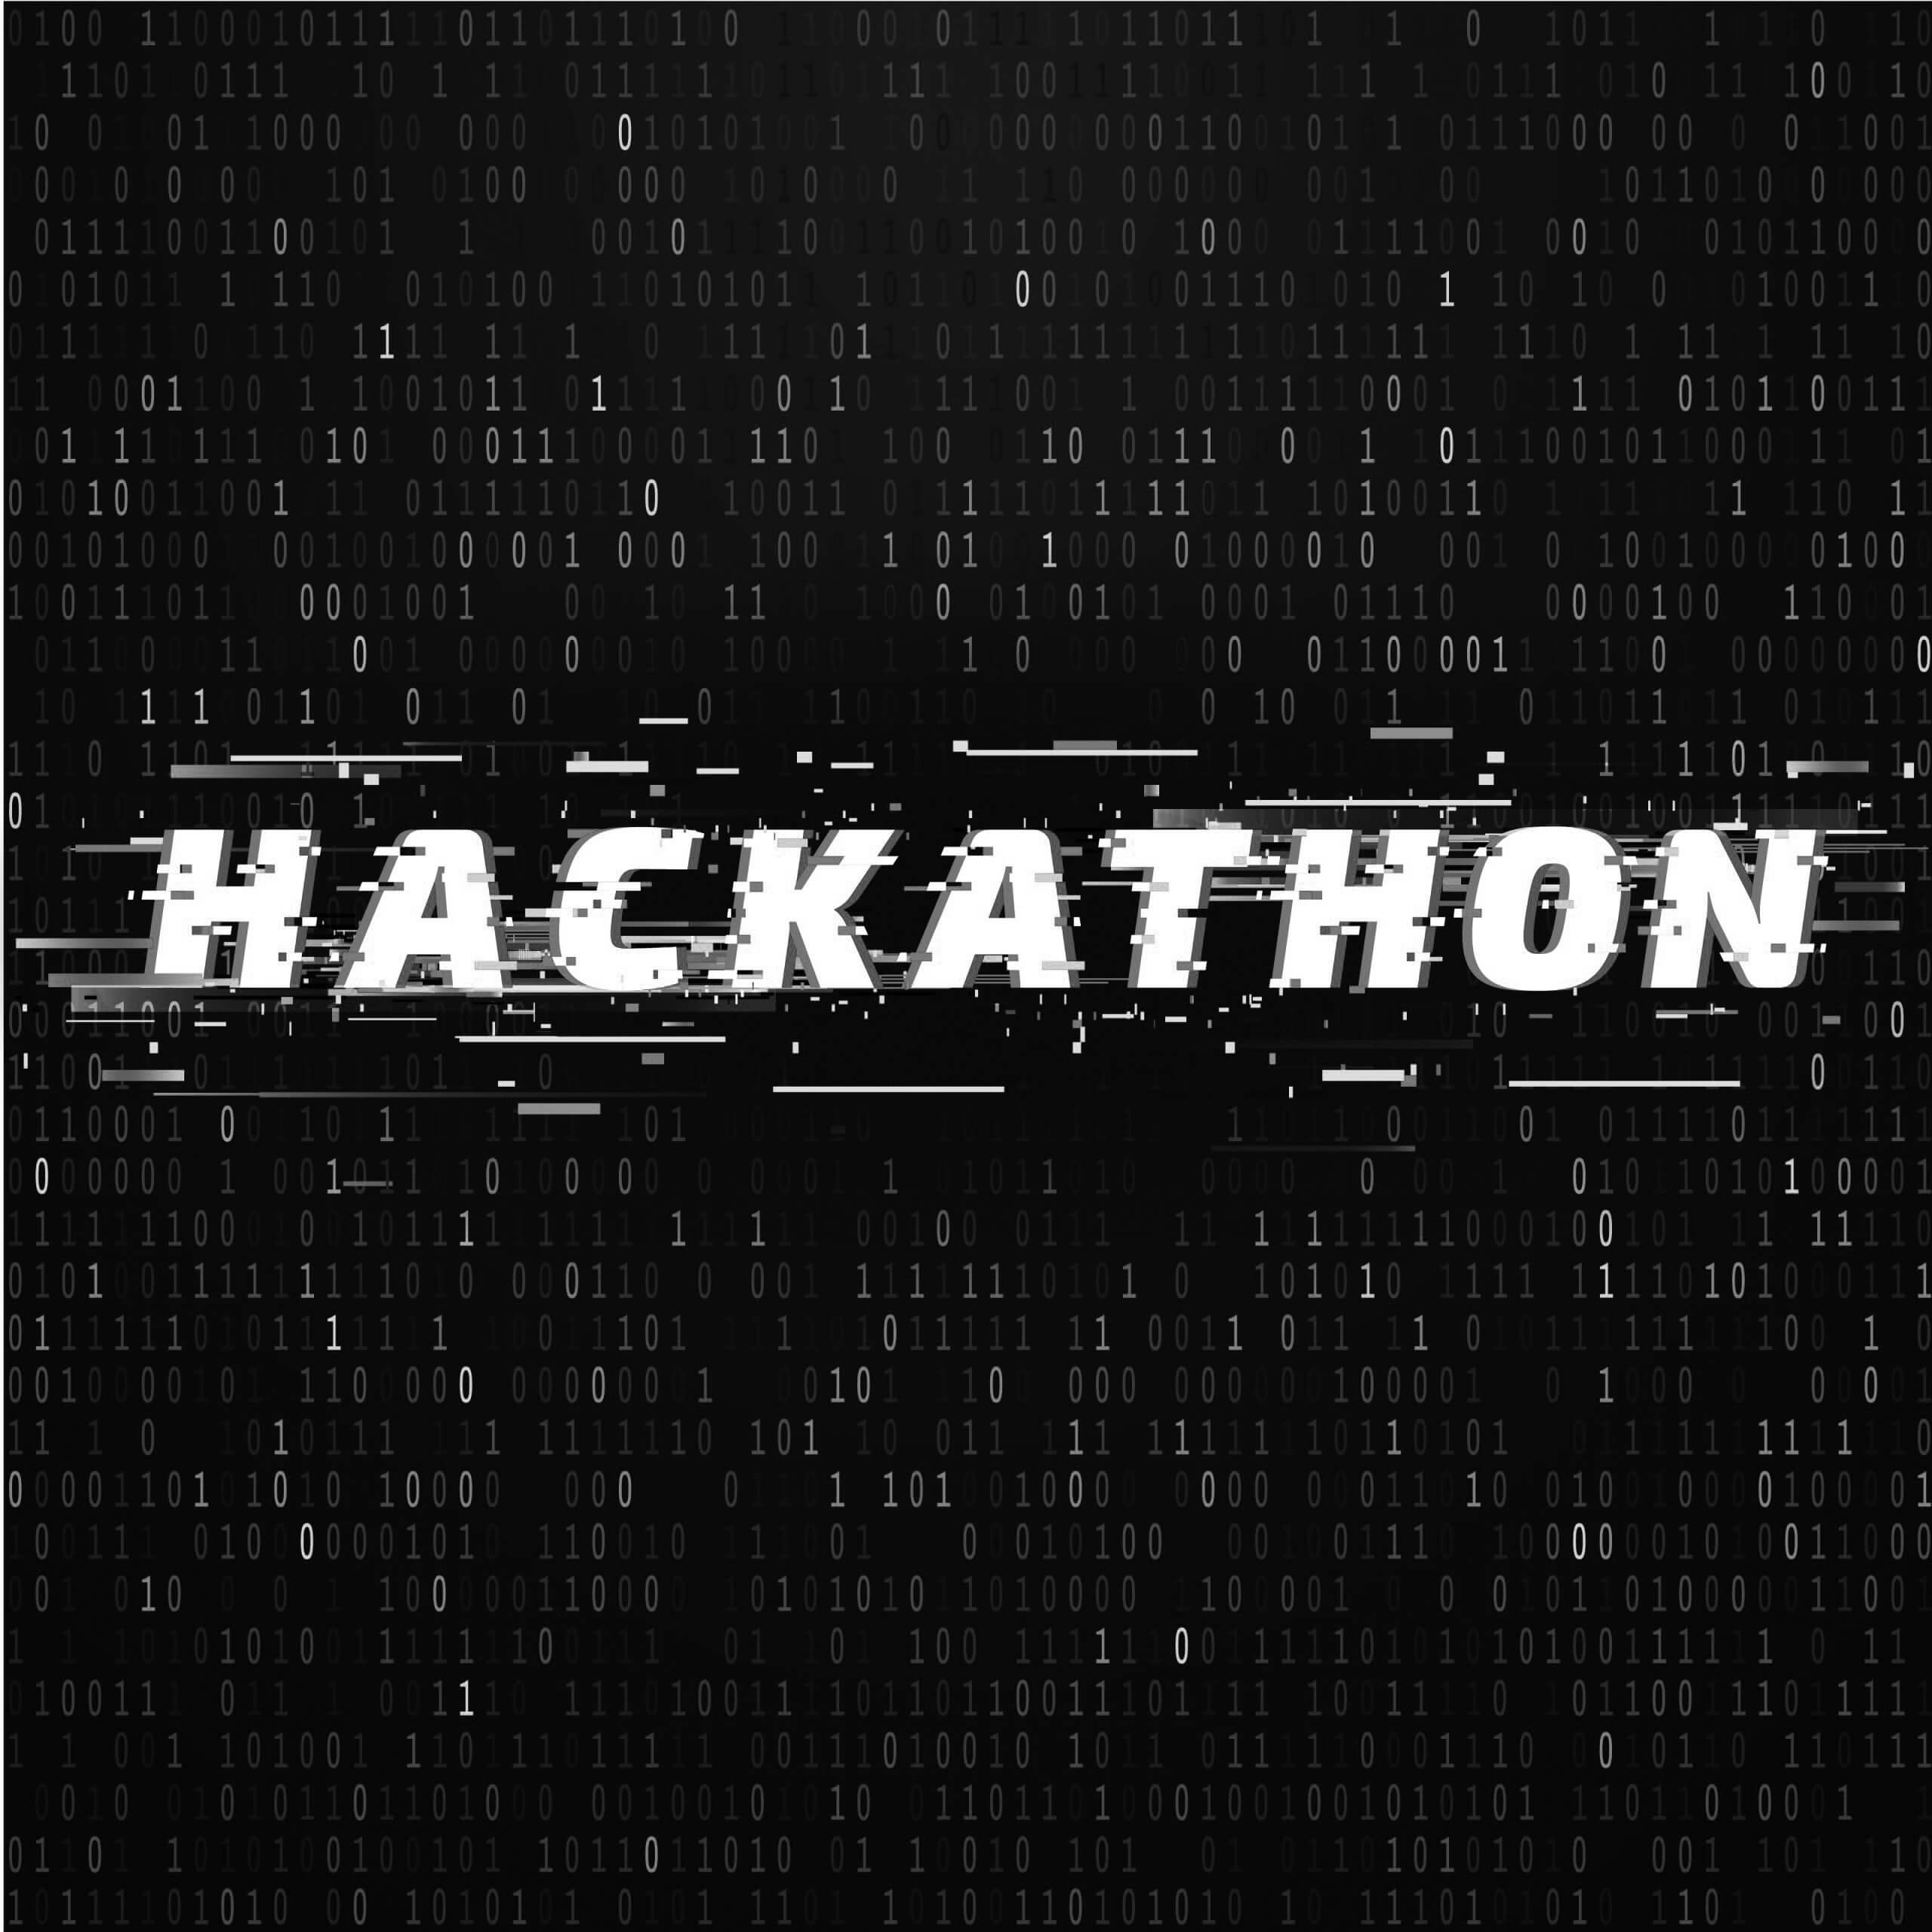 Help build robust solutions to fight cybercrime at the CCTNS Hackathon and Cyber Challenge 2020